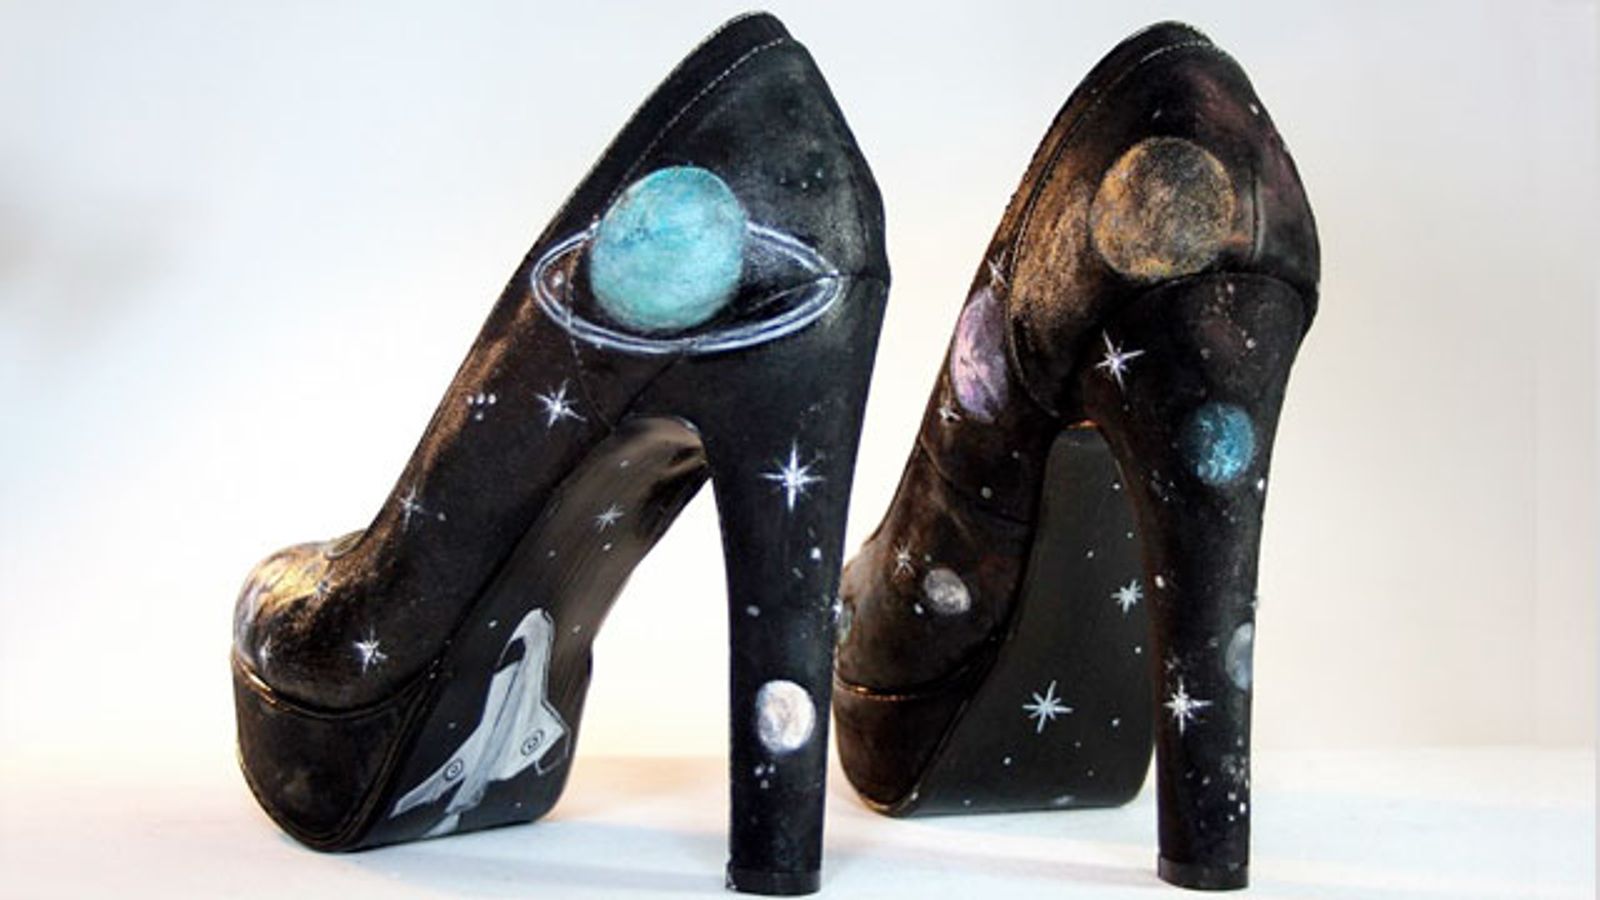 Coco Brown Working With Artist Michael Dyne Mieth on Space Shoe Design